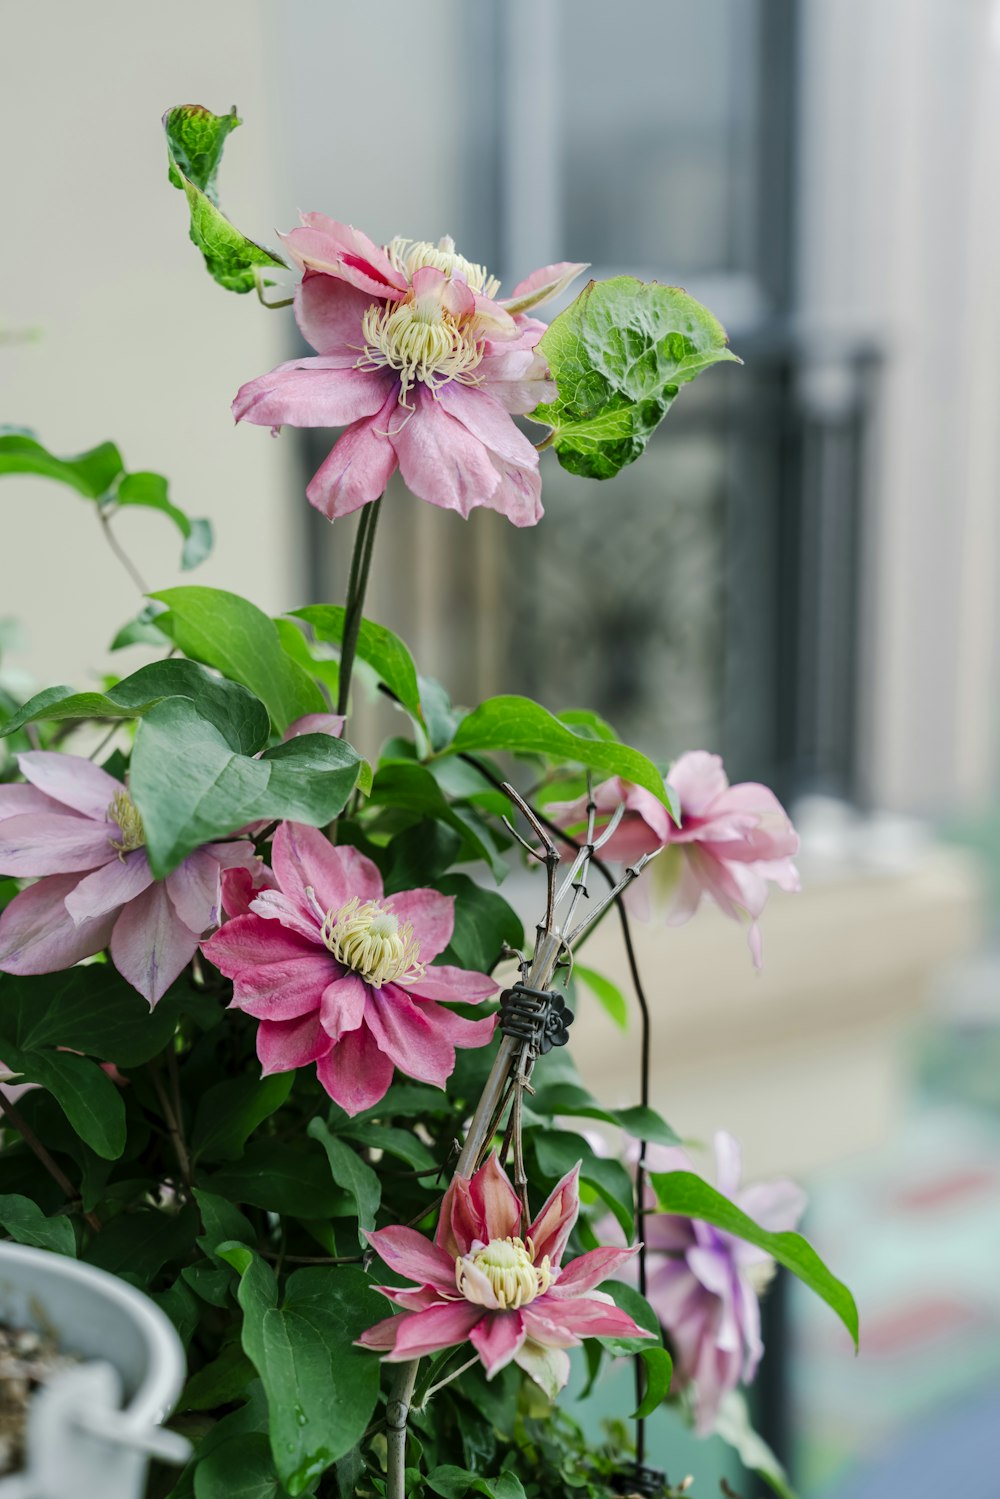 a potted plant with pink flowers and green leaves